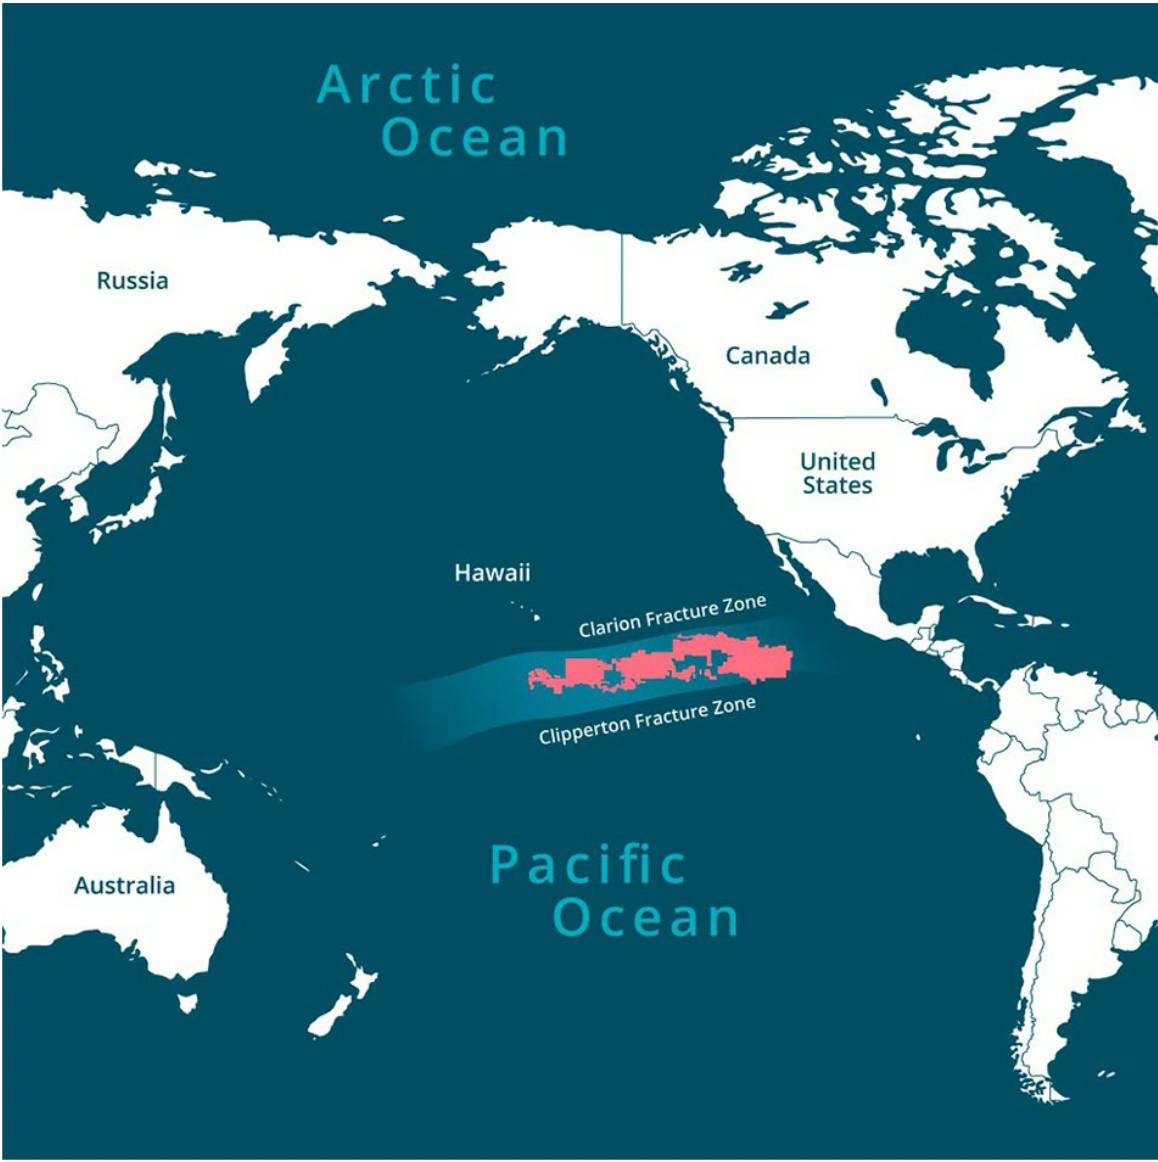 The Clarion Clipperton Fracture Zone